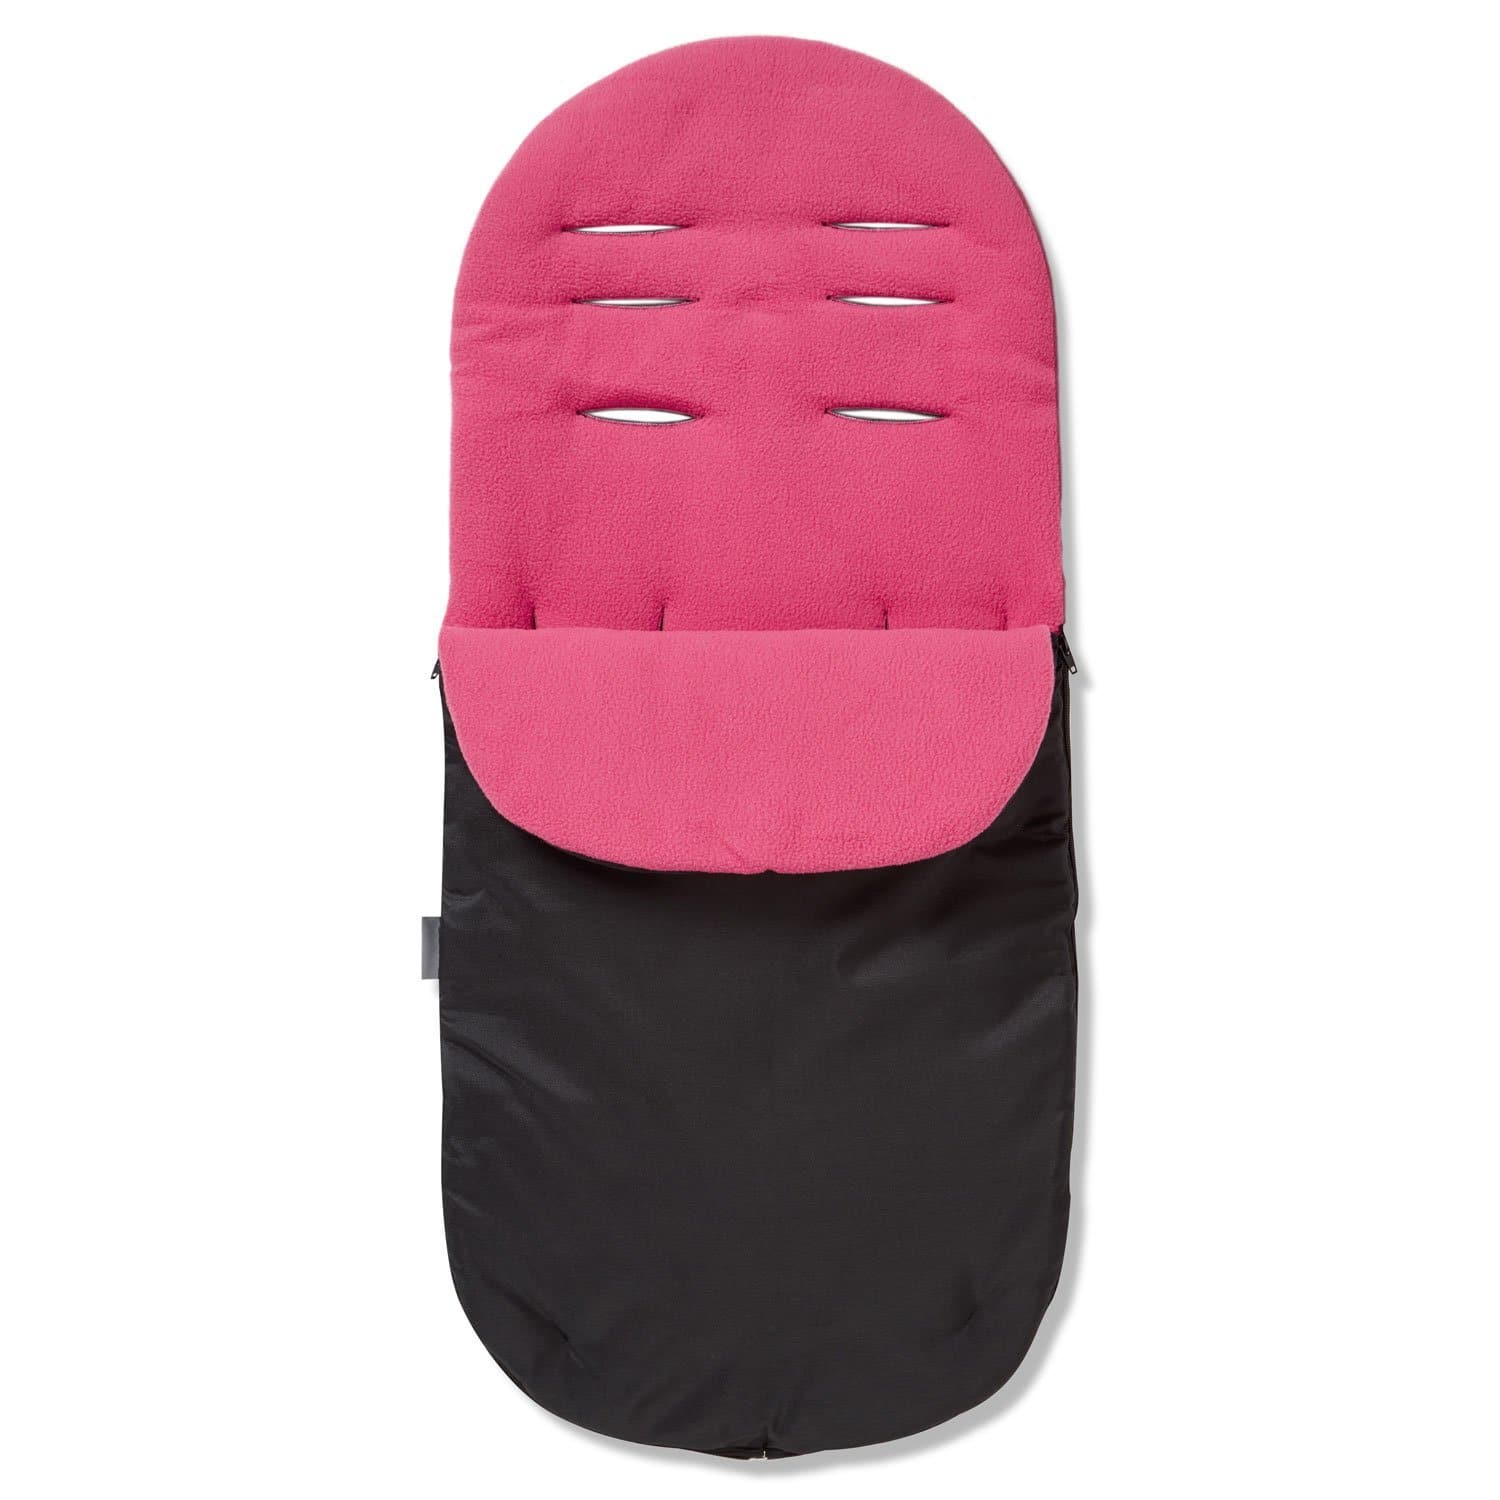 Footmuff / Cosy Toes Compatible with BOB - Dark Pink / Fits All Models | For Your Little One